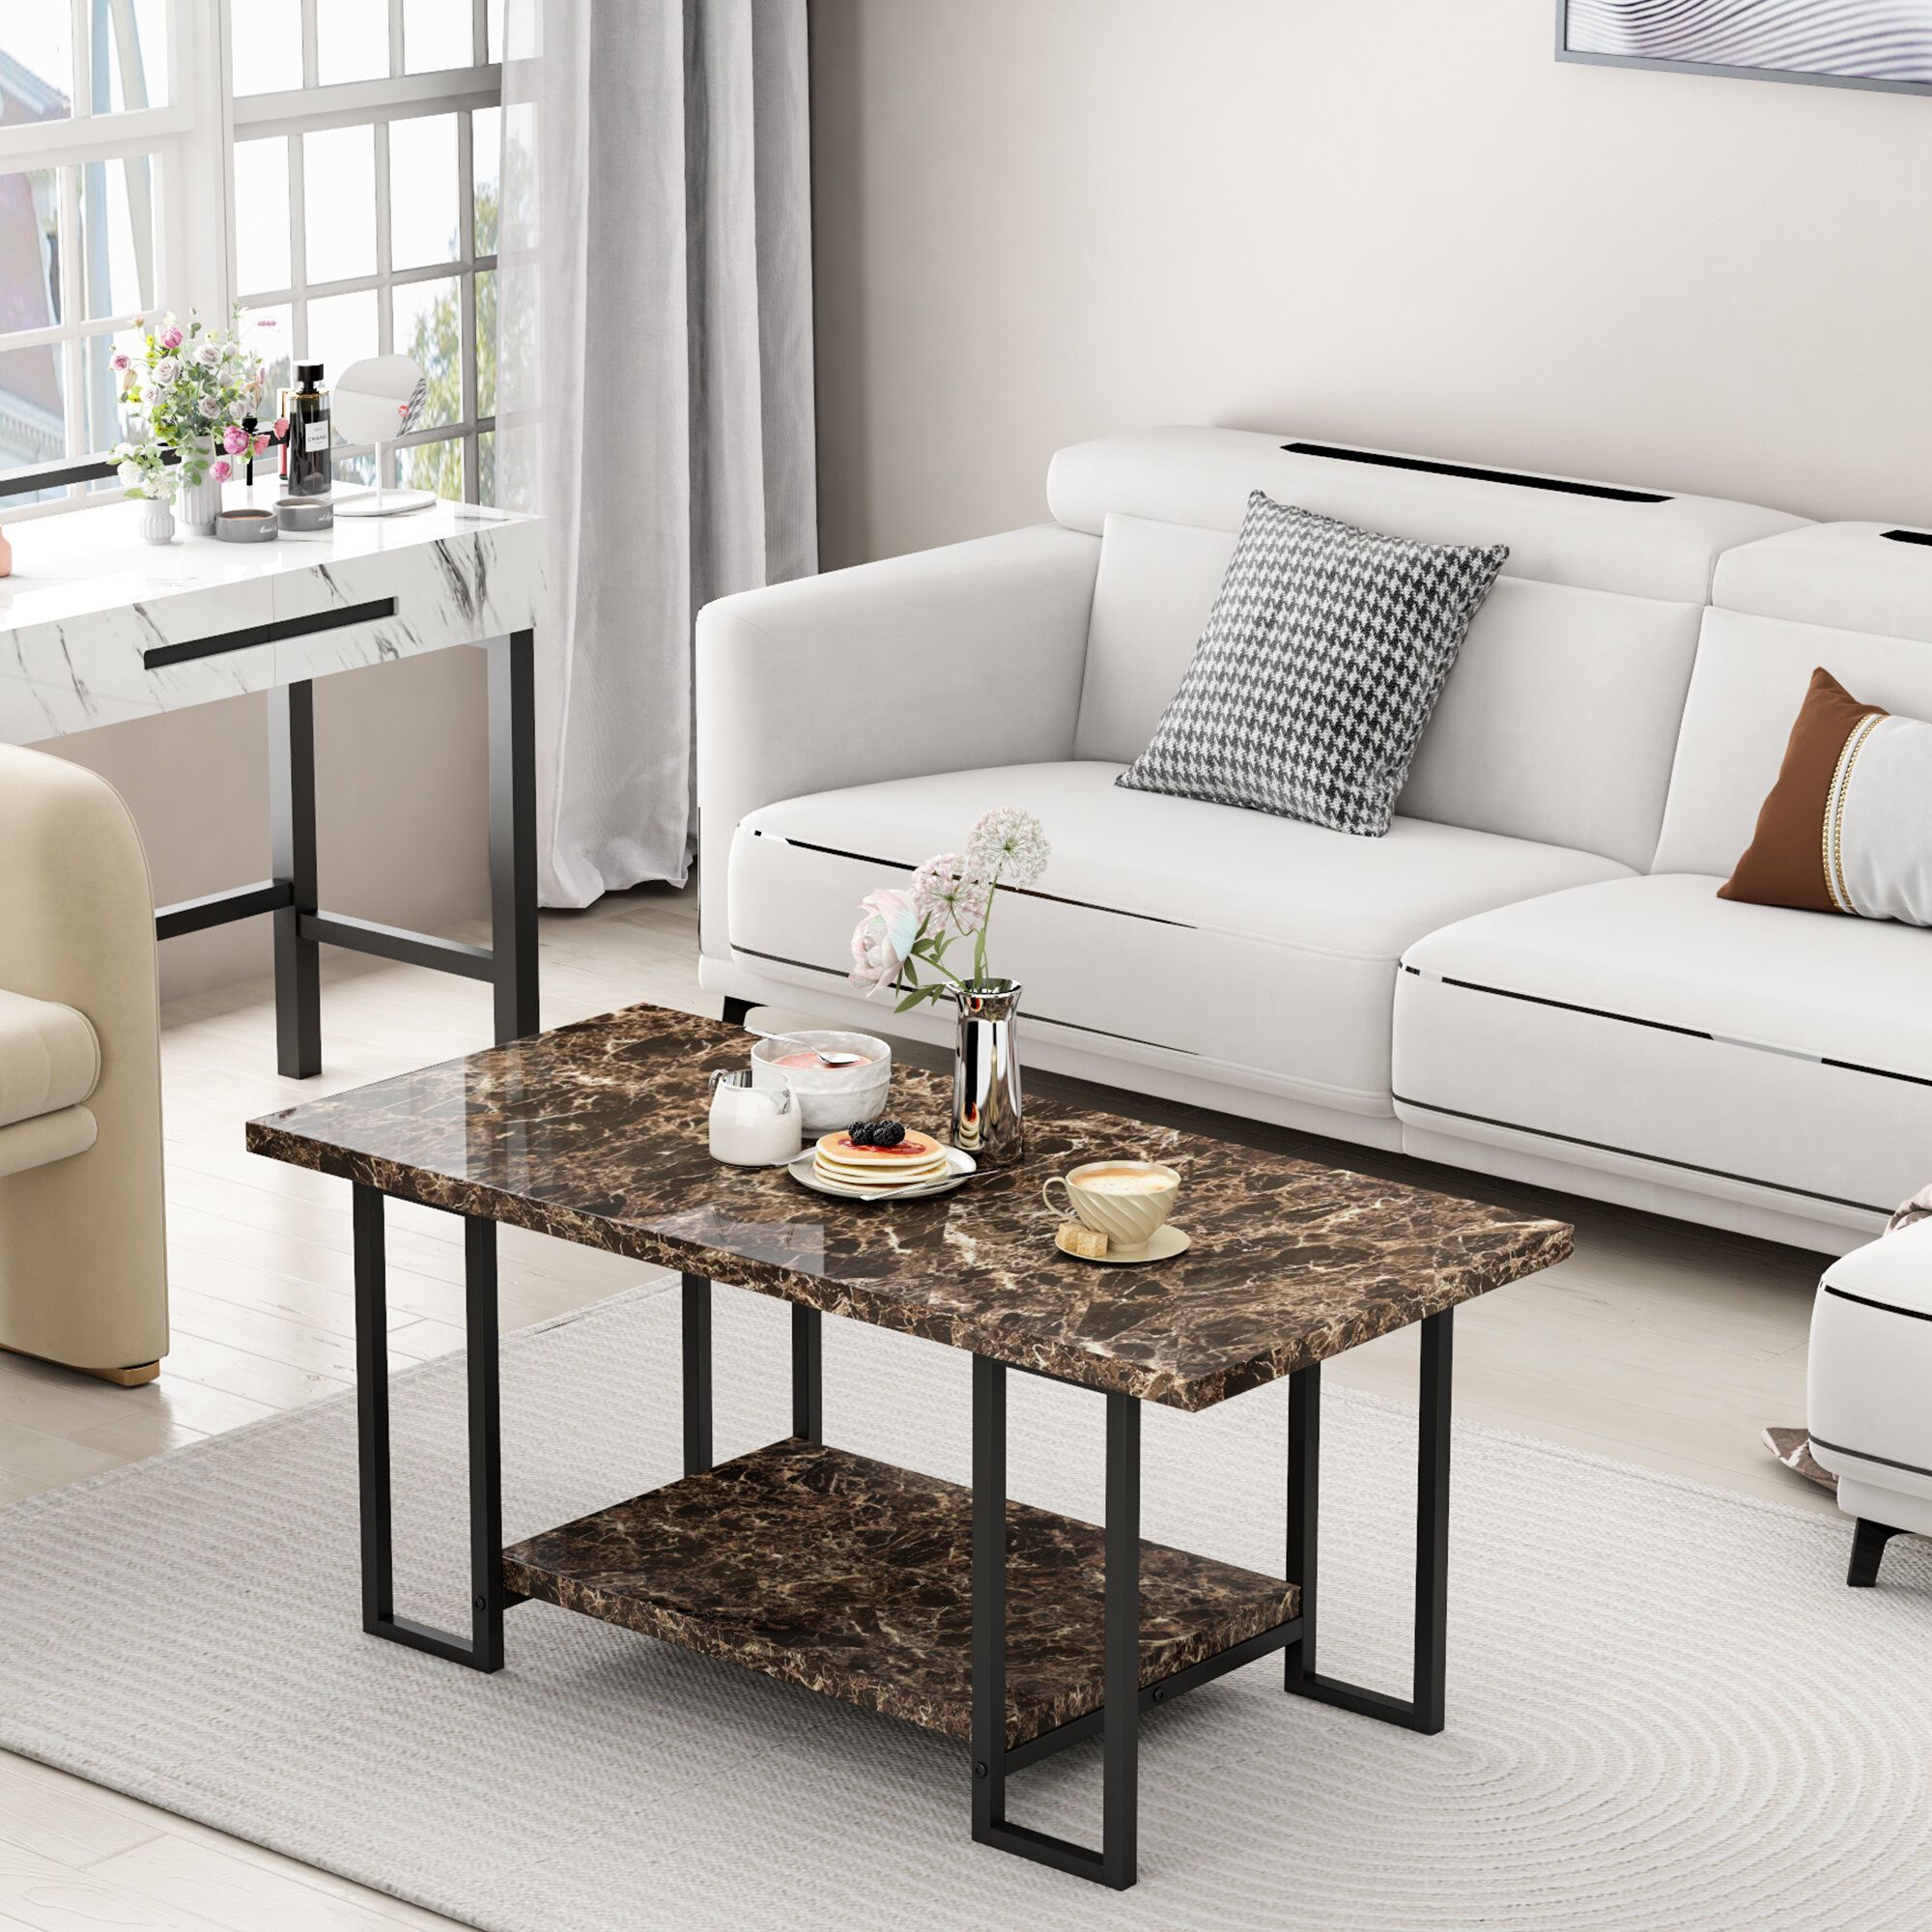 Latitude Run® 39'' Wide 2 Tier Faux Marble Top Coffee Table With Steel  Frame & Reviews | Wayfair Pertaining To Faux Marble Top Coffee Tables (View 7 of 15)